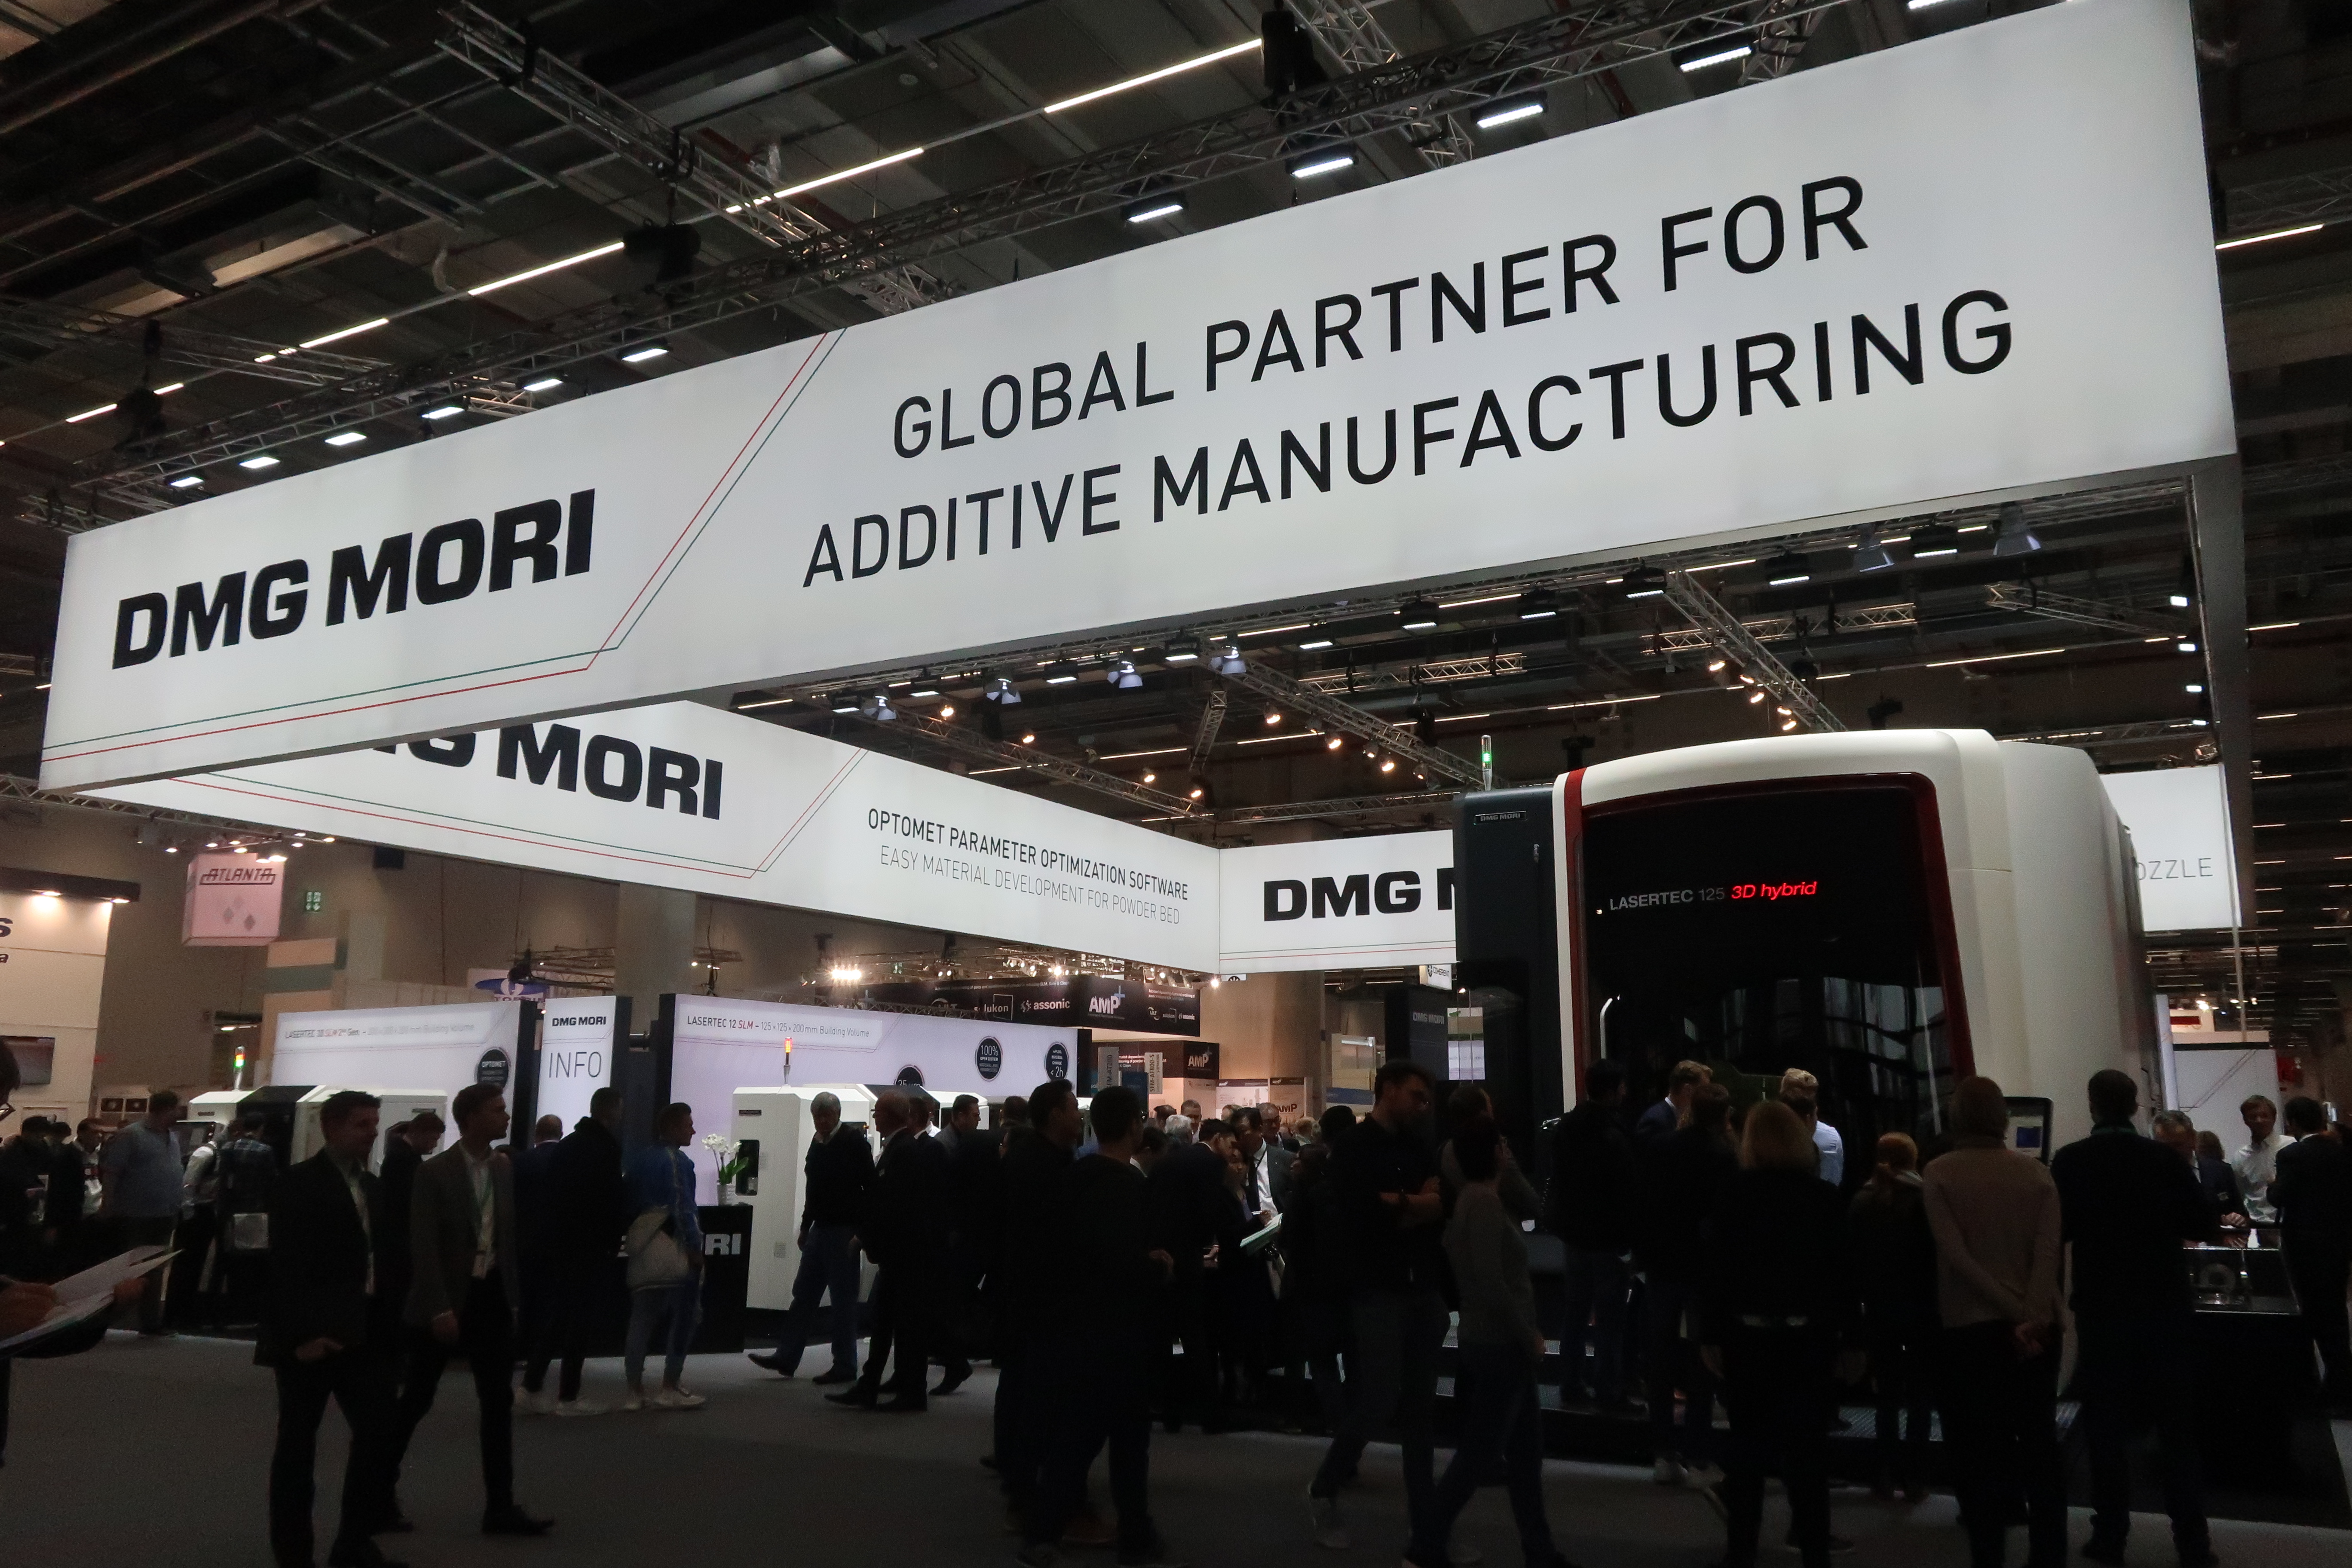 The DMG MORI LASERTEC 125 3D hybrid system attracts a crowd at Formnext 2019. Photo by Beau Jackson